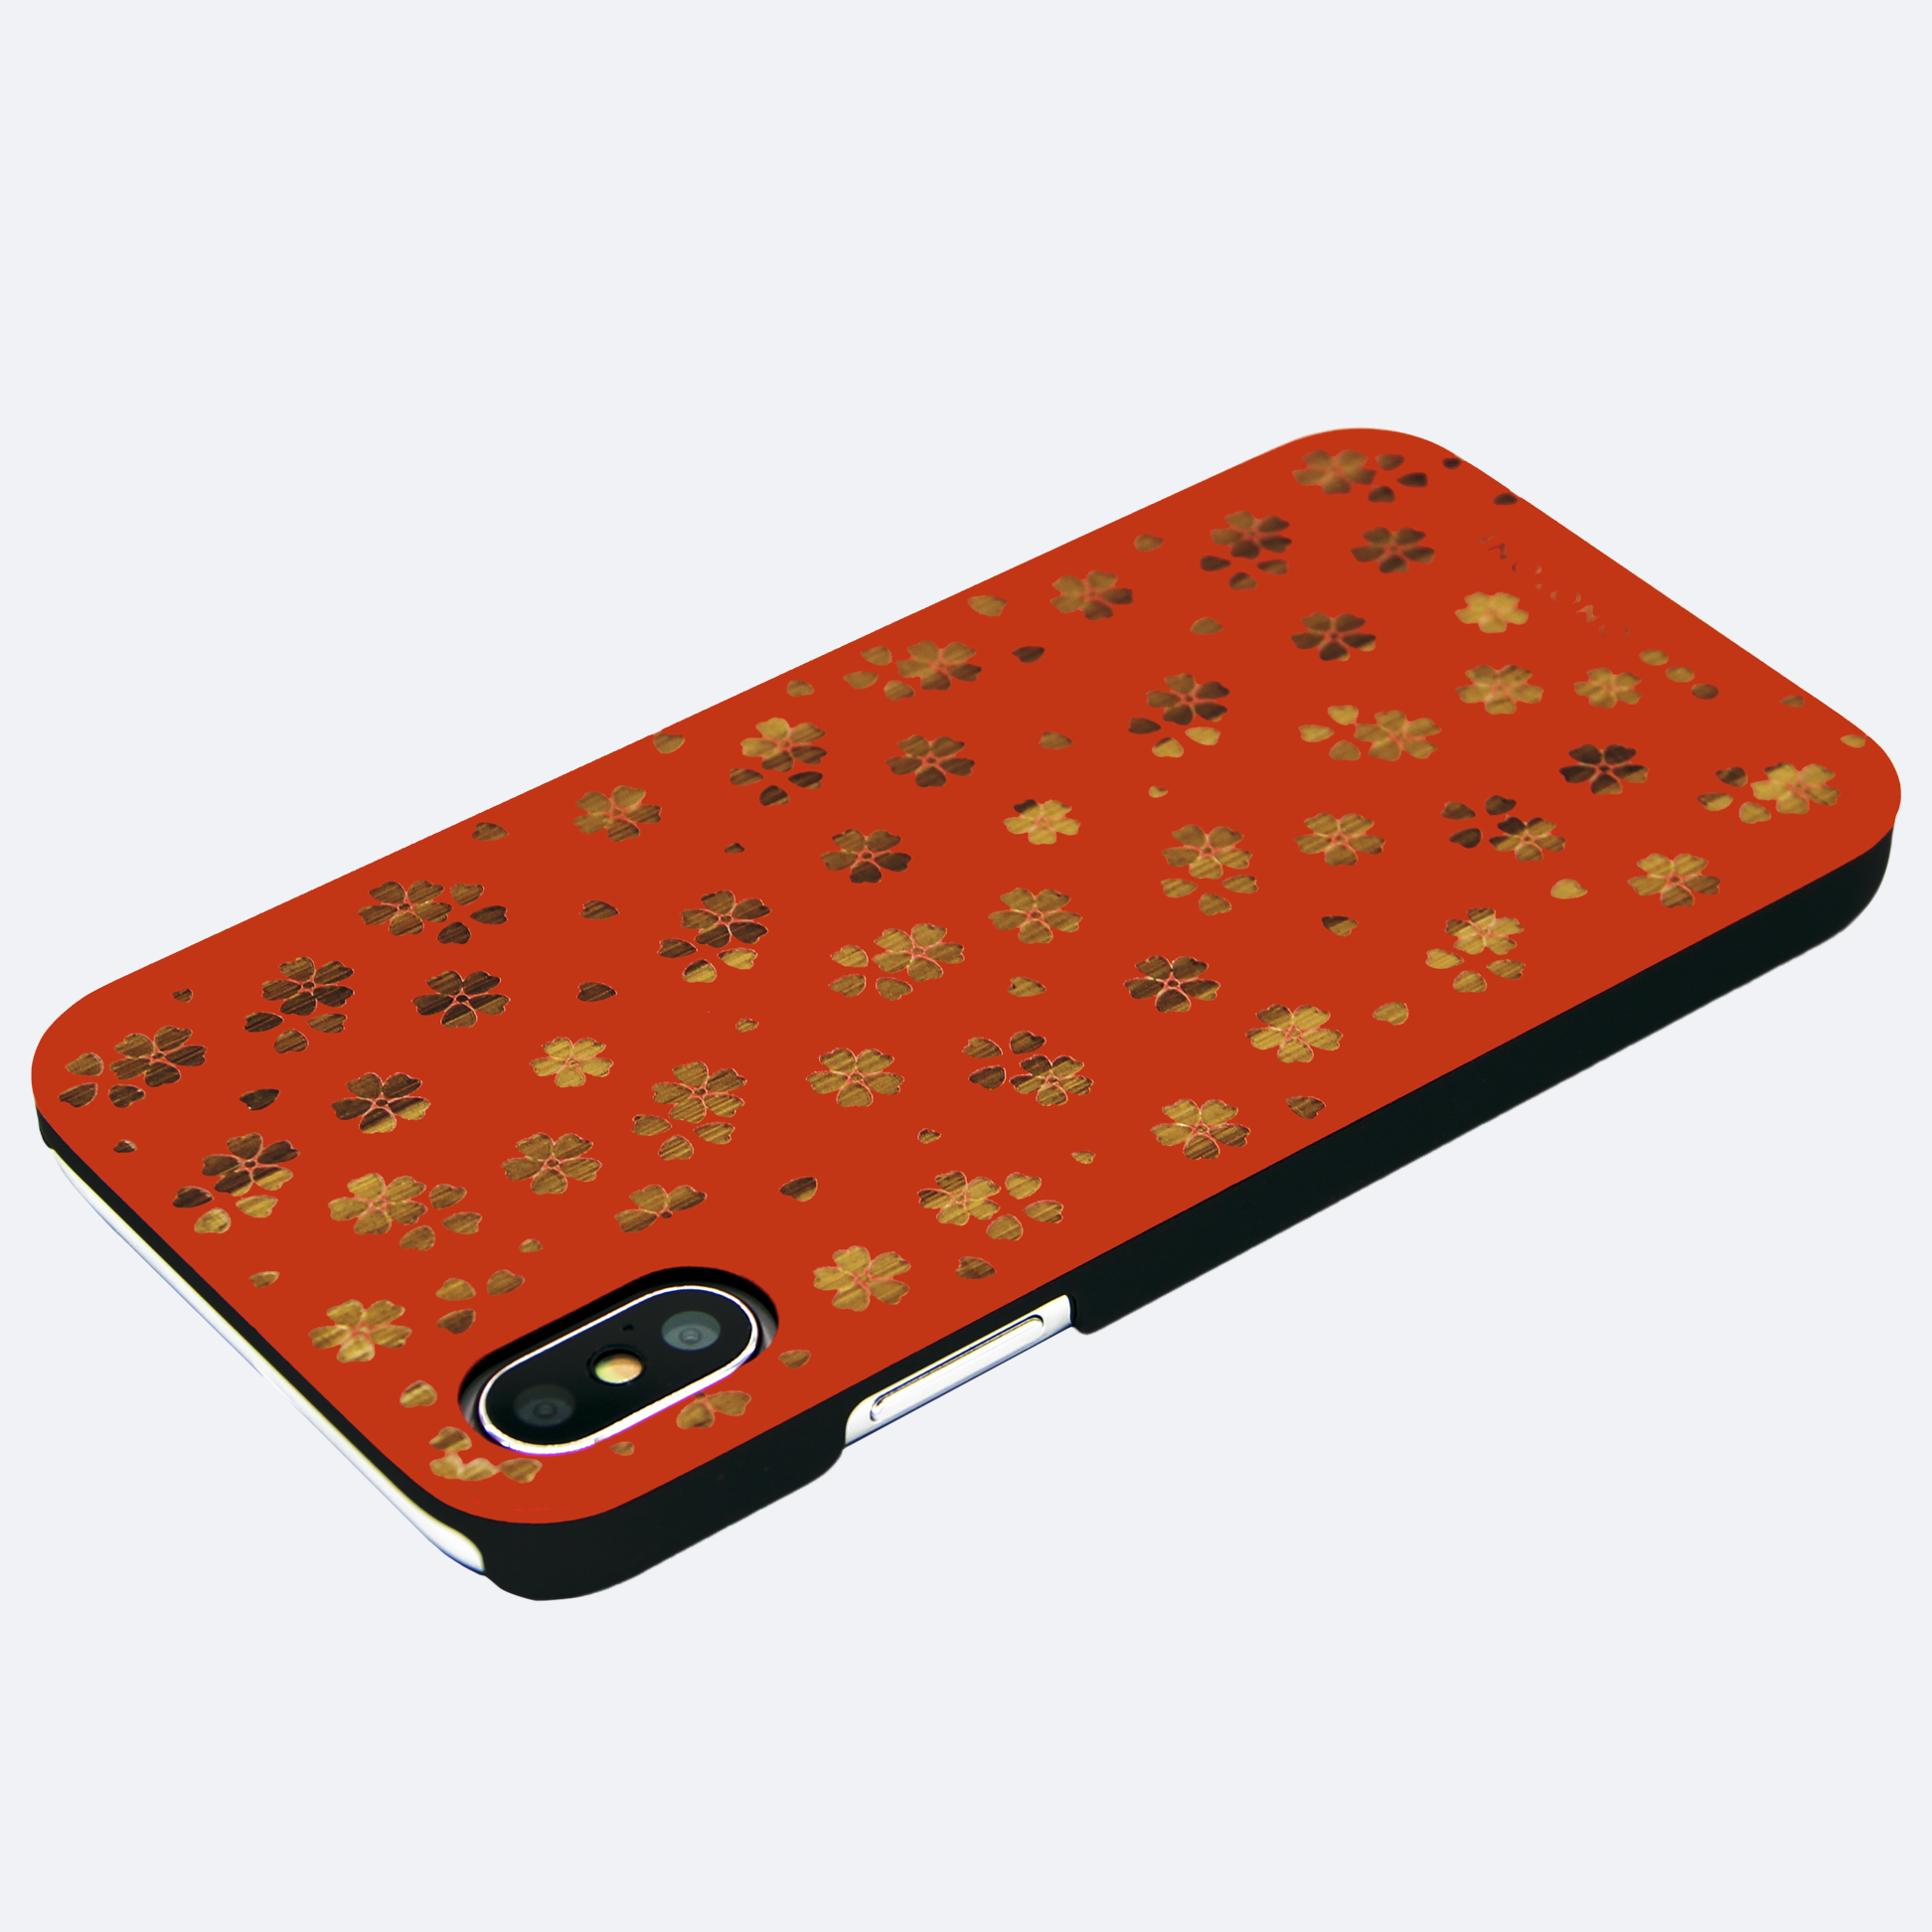 Japanese iPhone cases